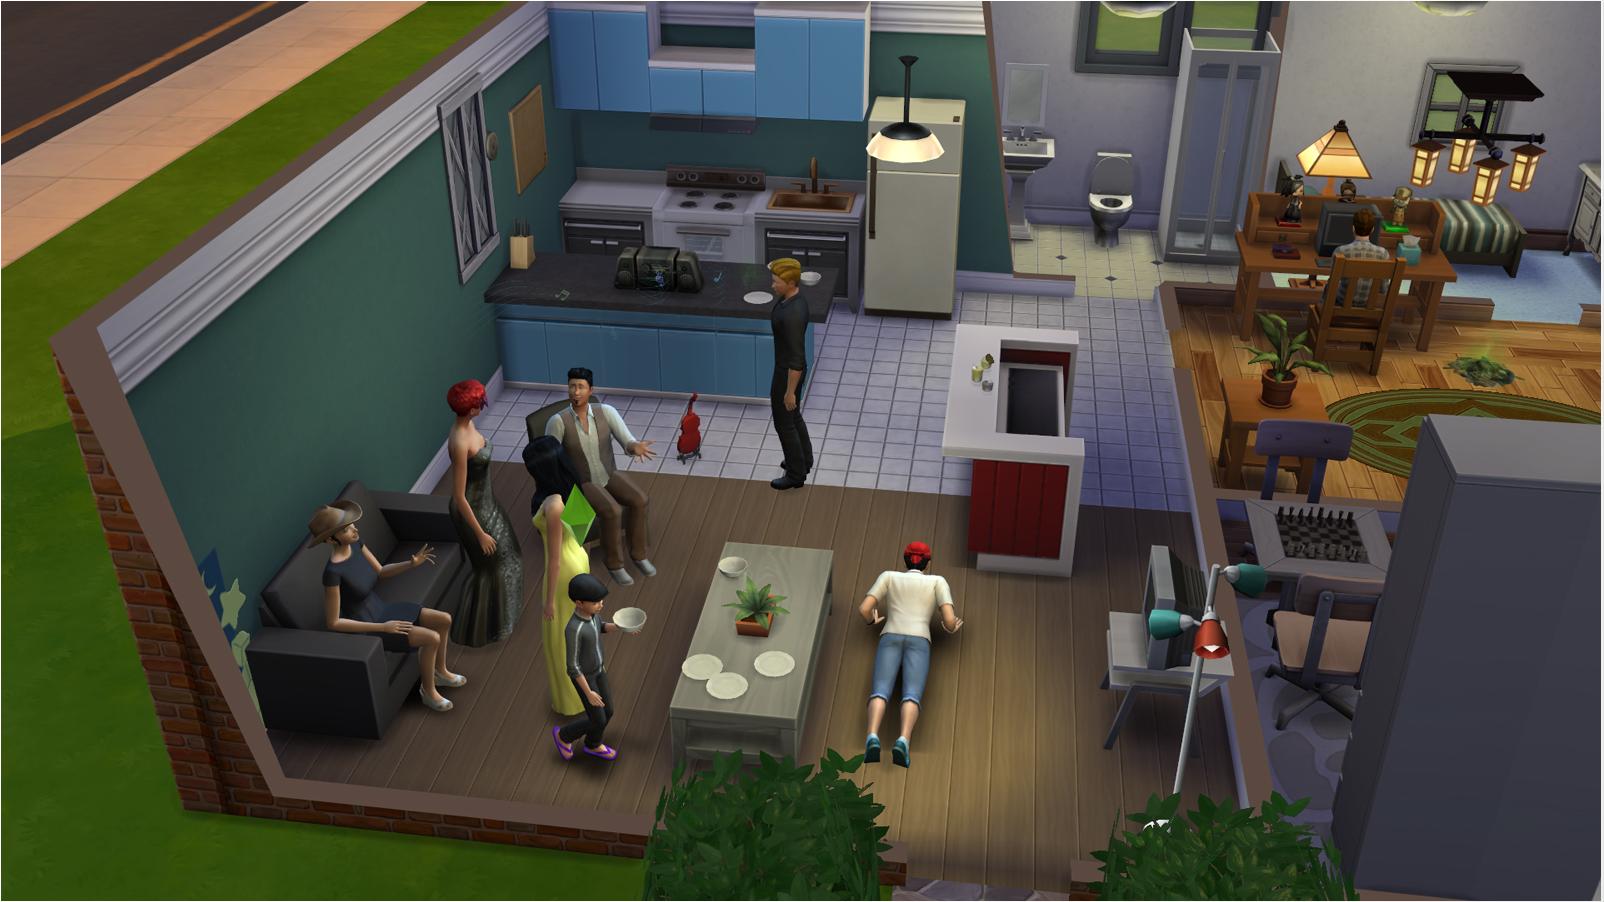 sims 4 play online free